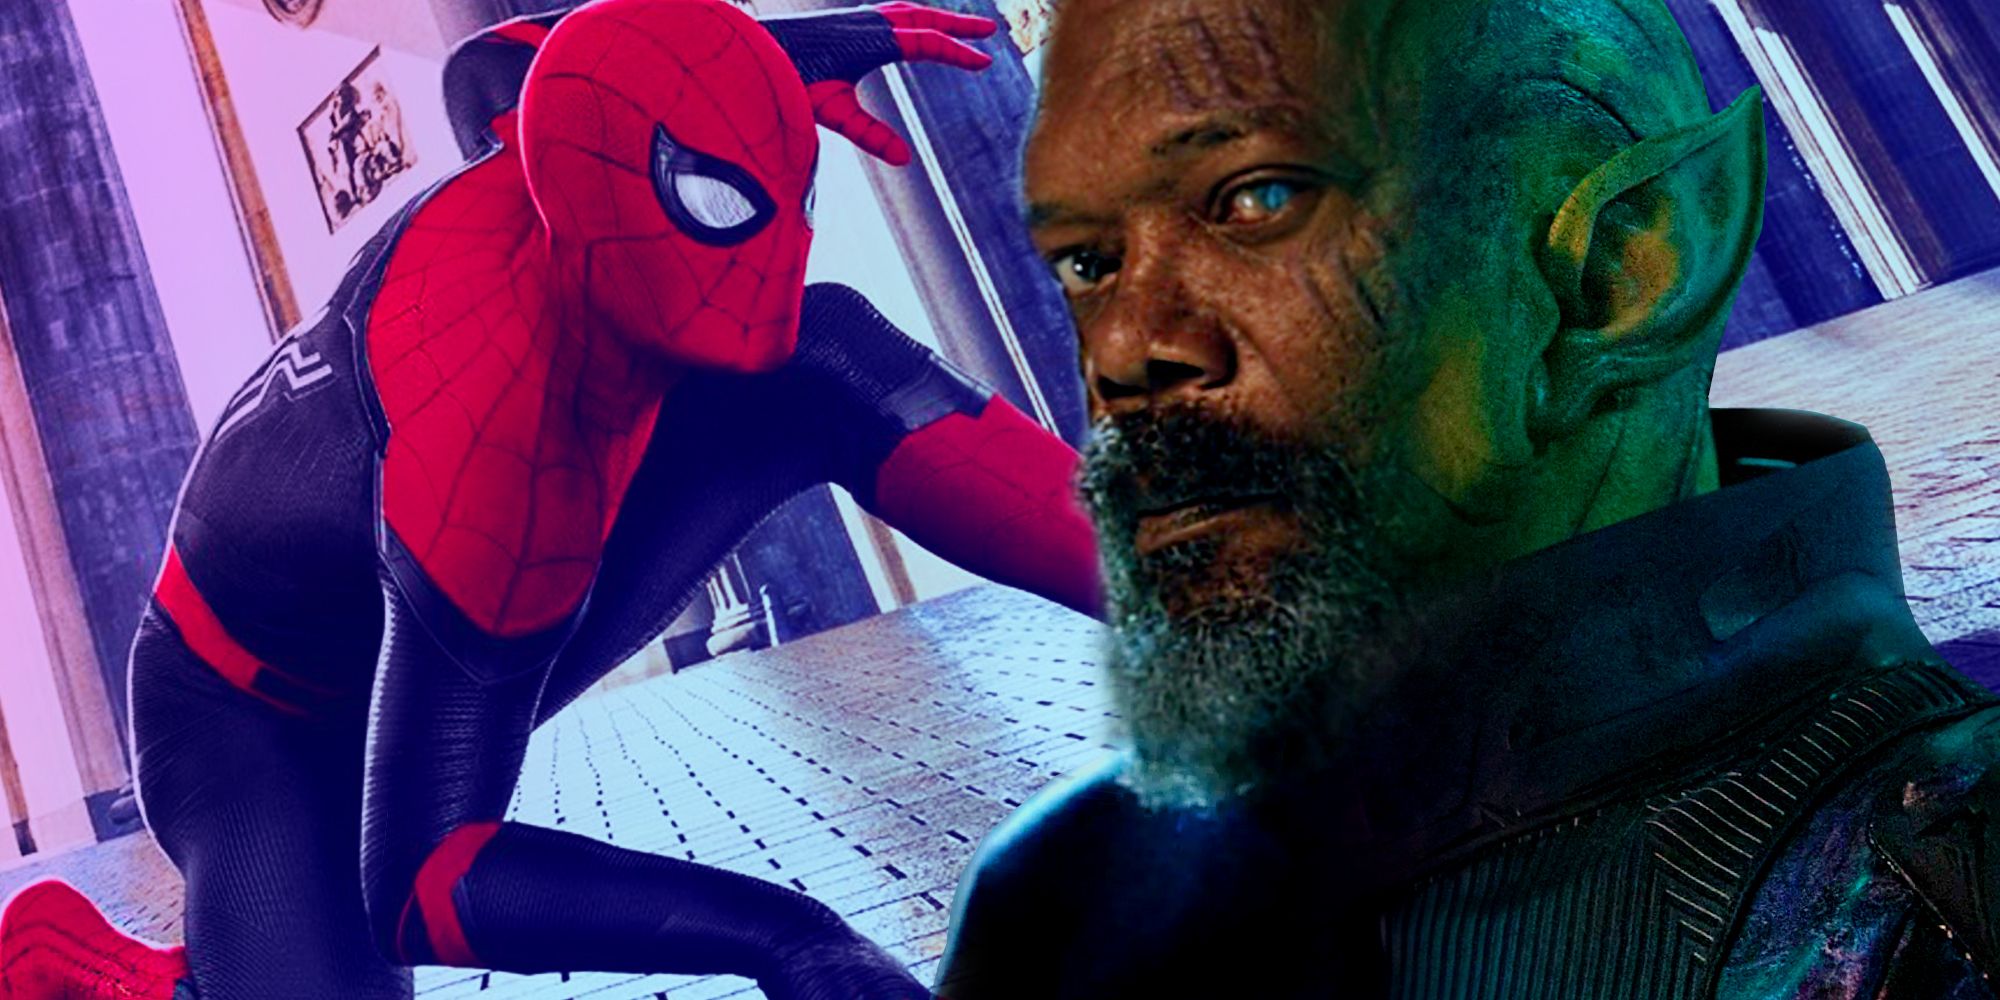 Spider-Man and Nick Fury half-transformed into a Skrull